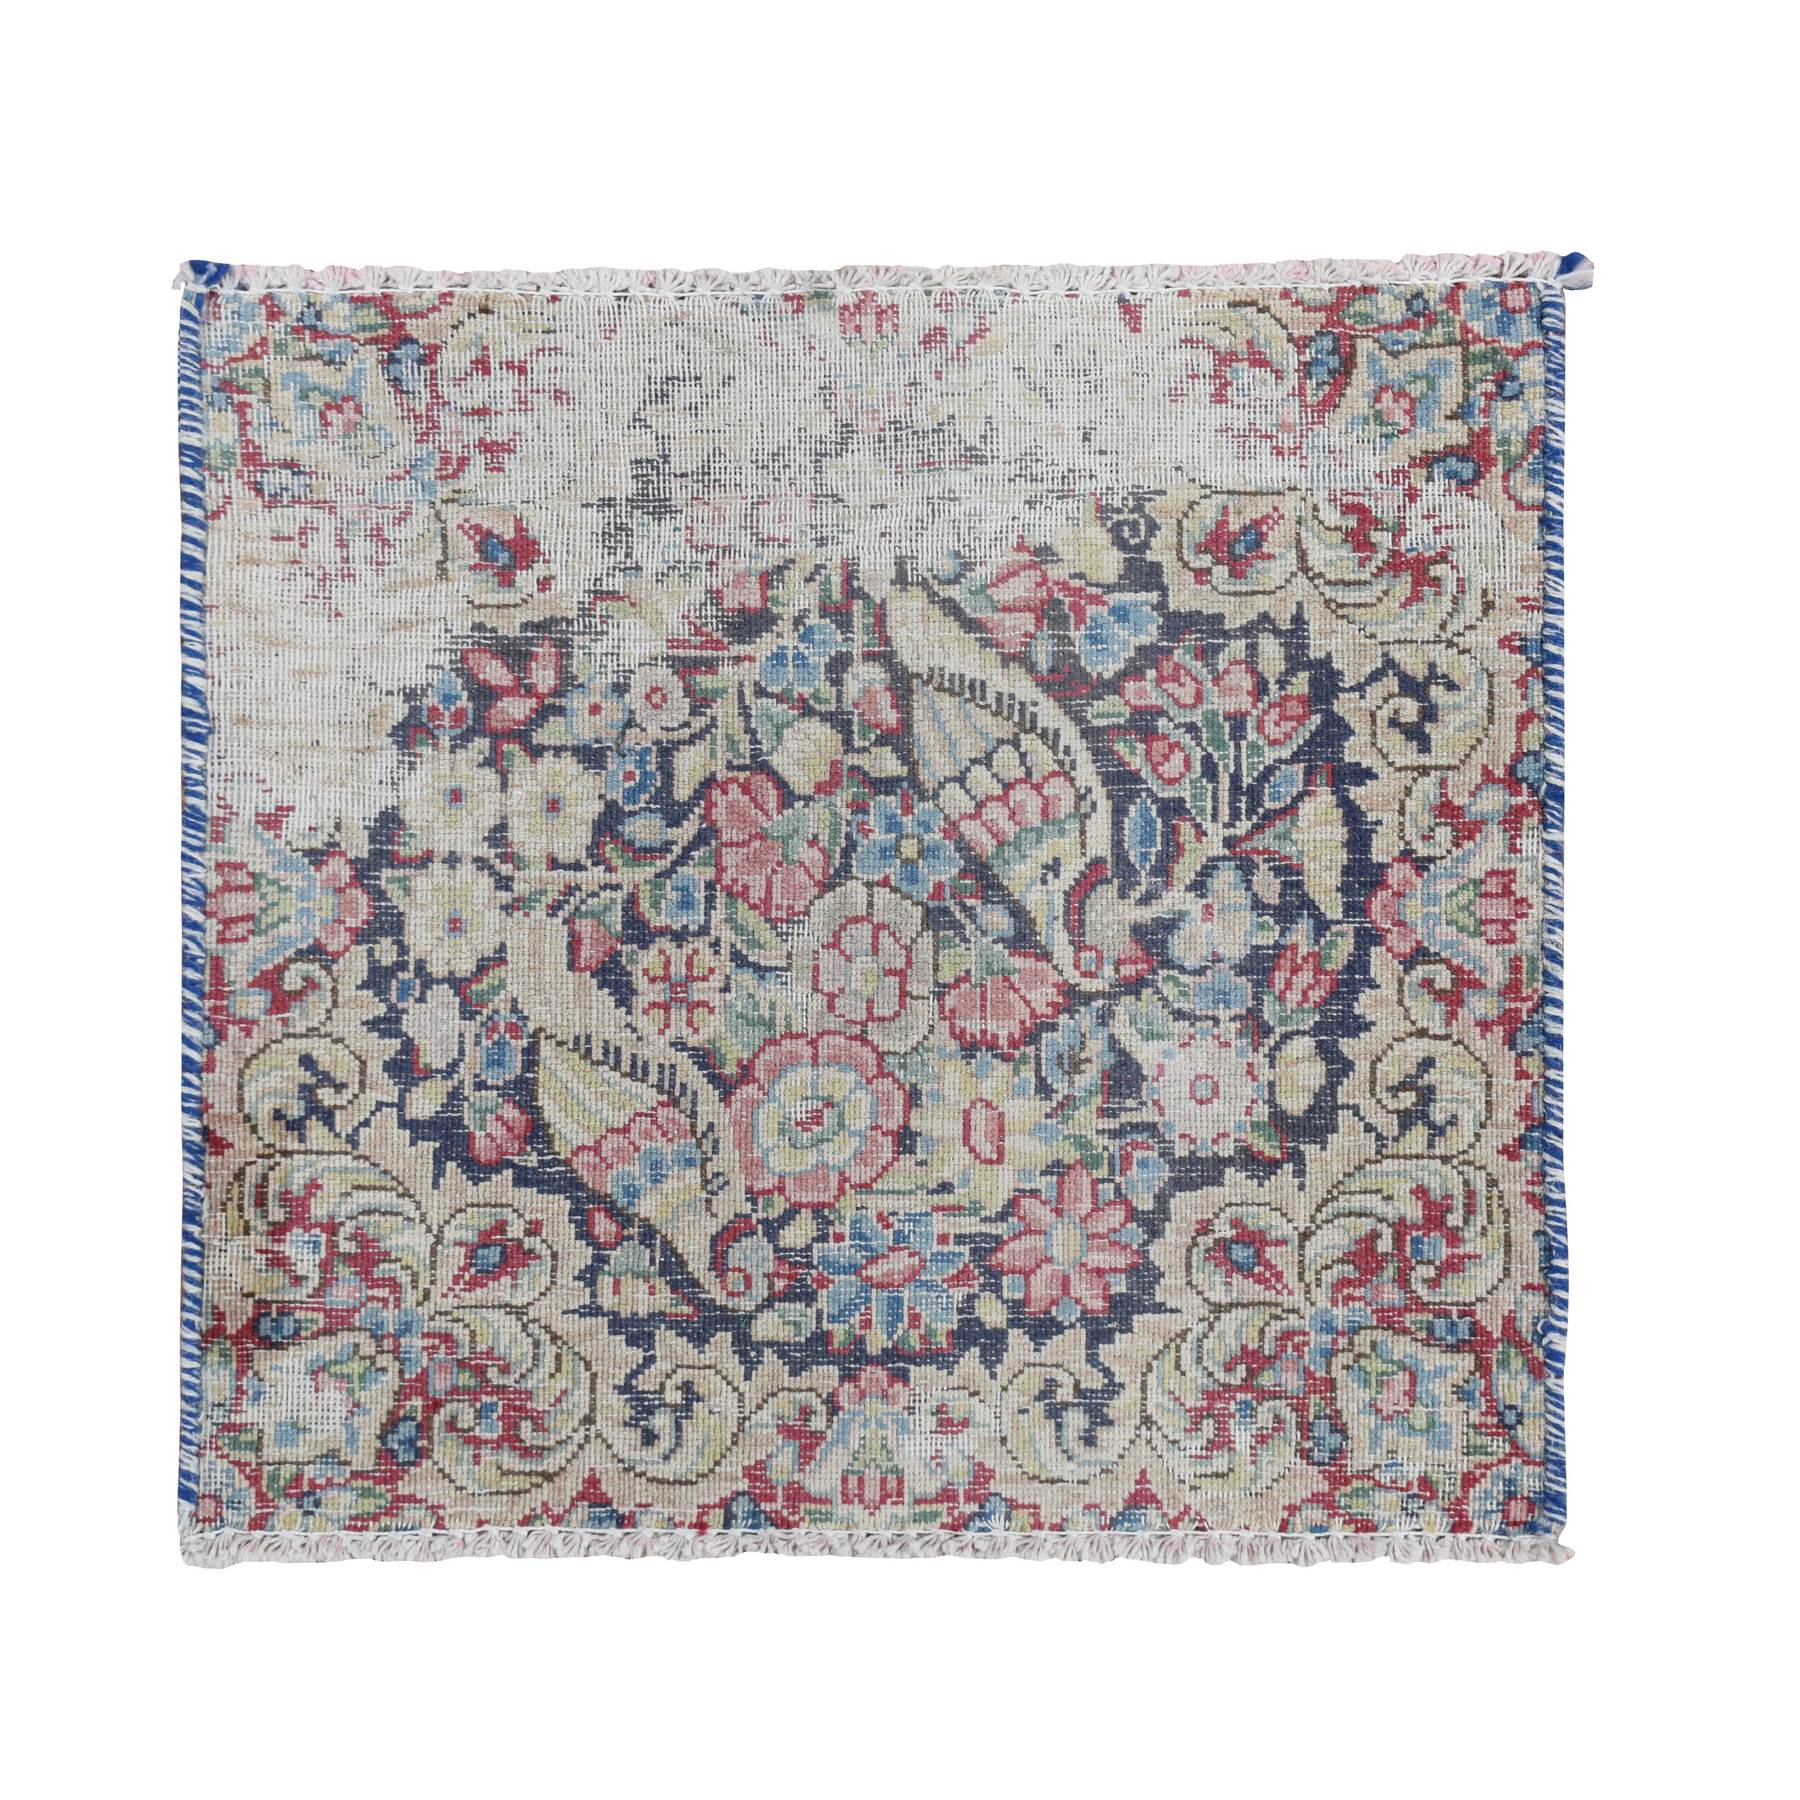  Wool Hand-Knotted Area Rug 1'5